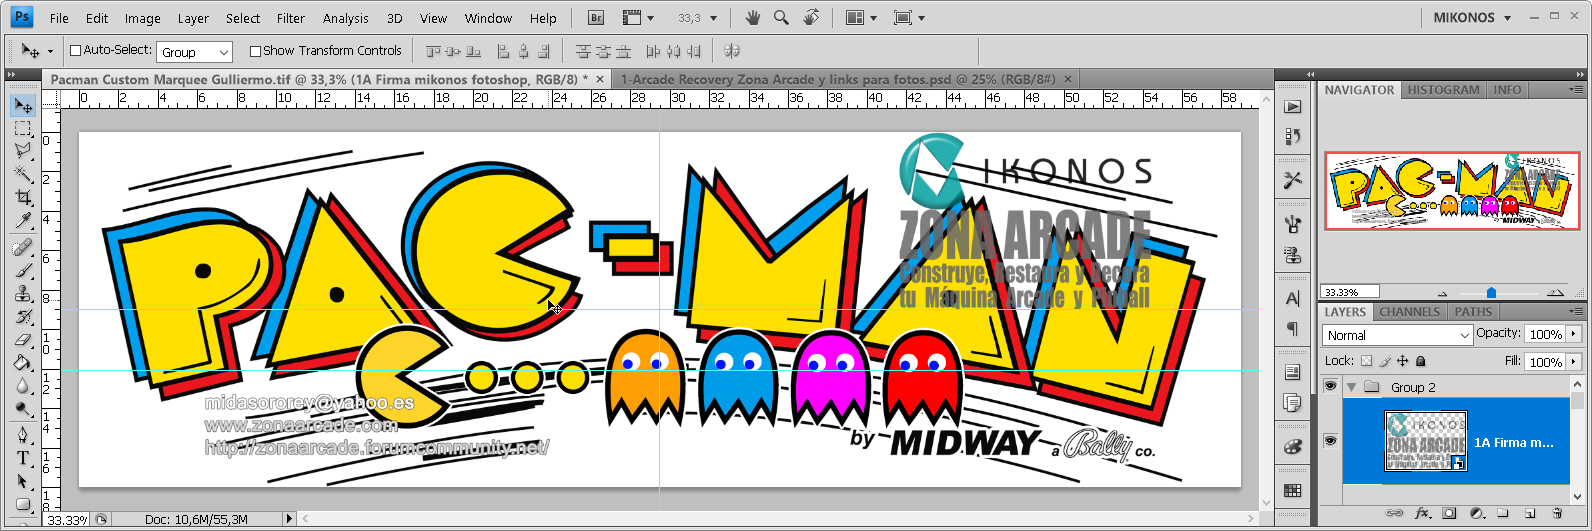 Pacman Custom Marquee Guillermo1